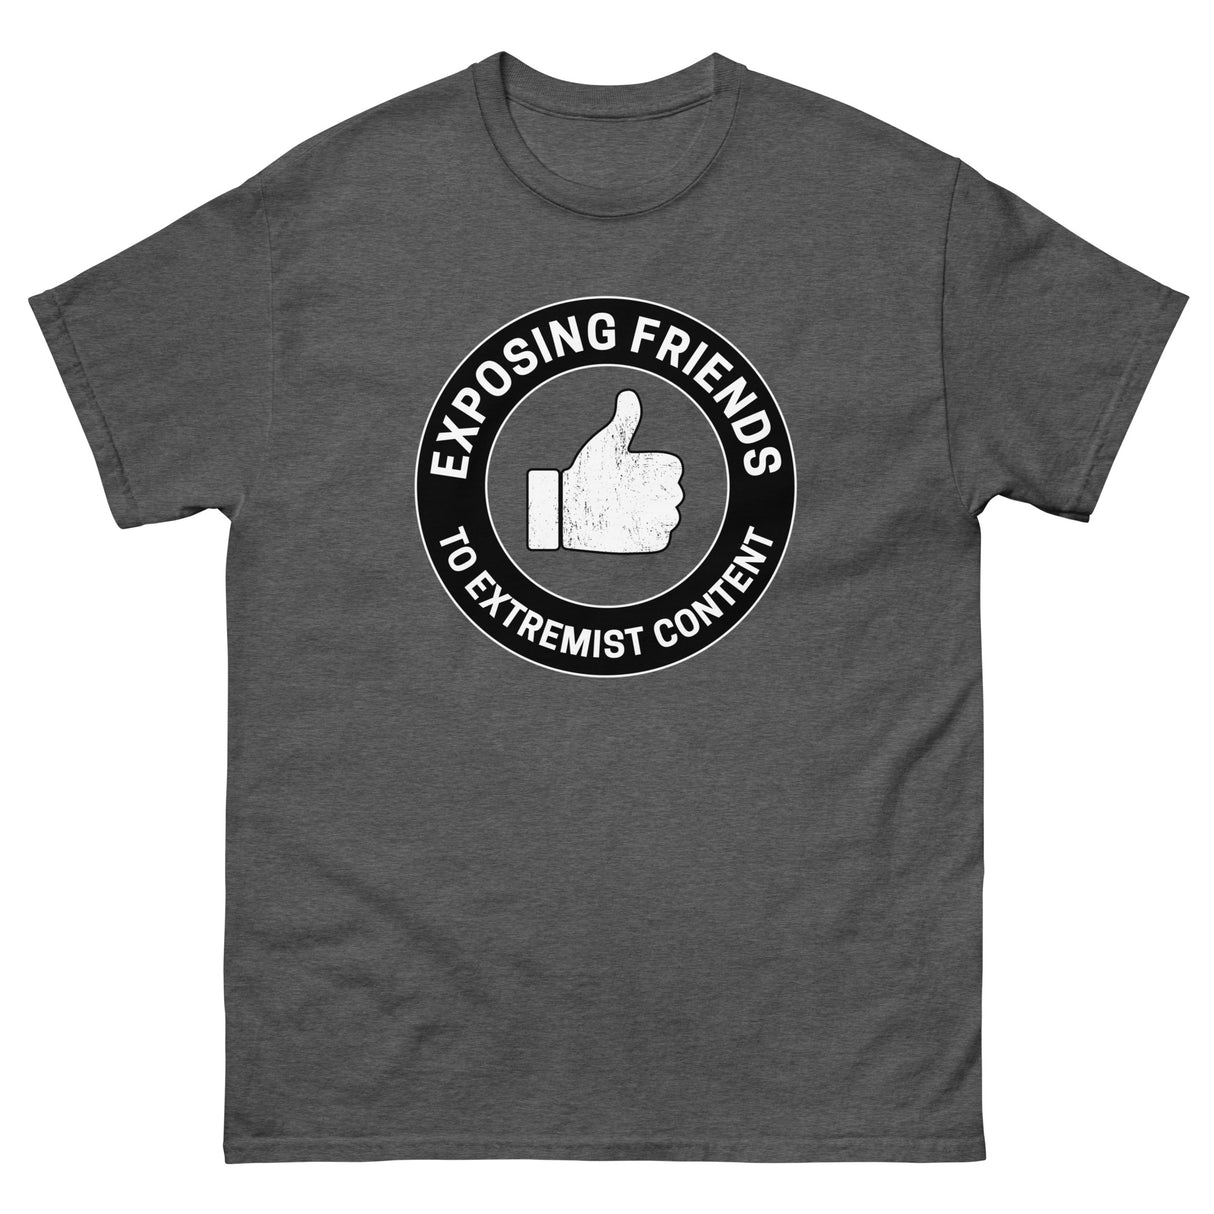 Exposing Friends to Extremist Content Heavy Cotton Shirt - Libertarian Country